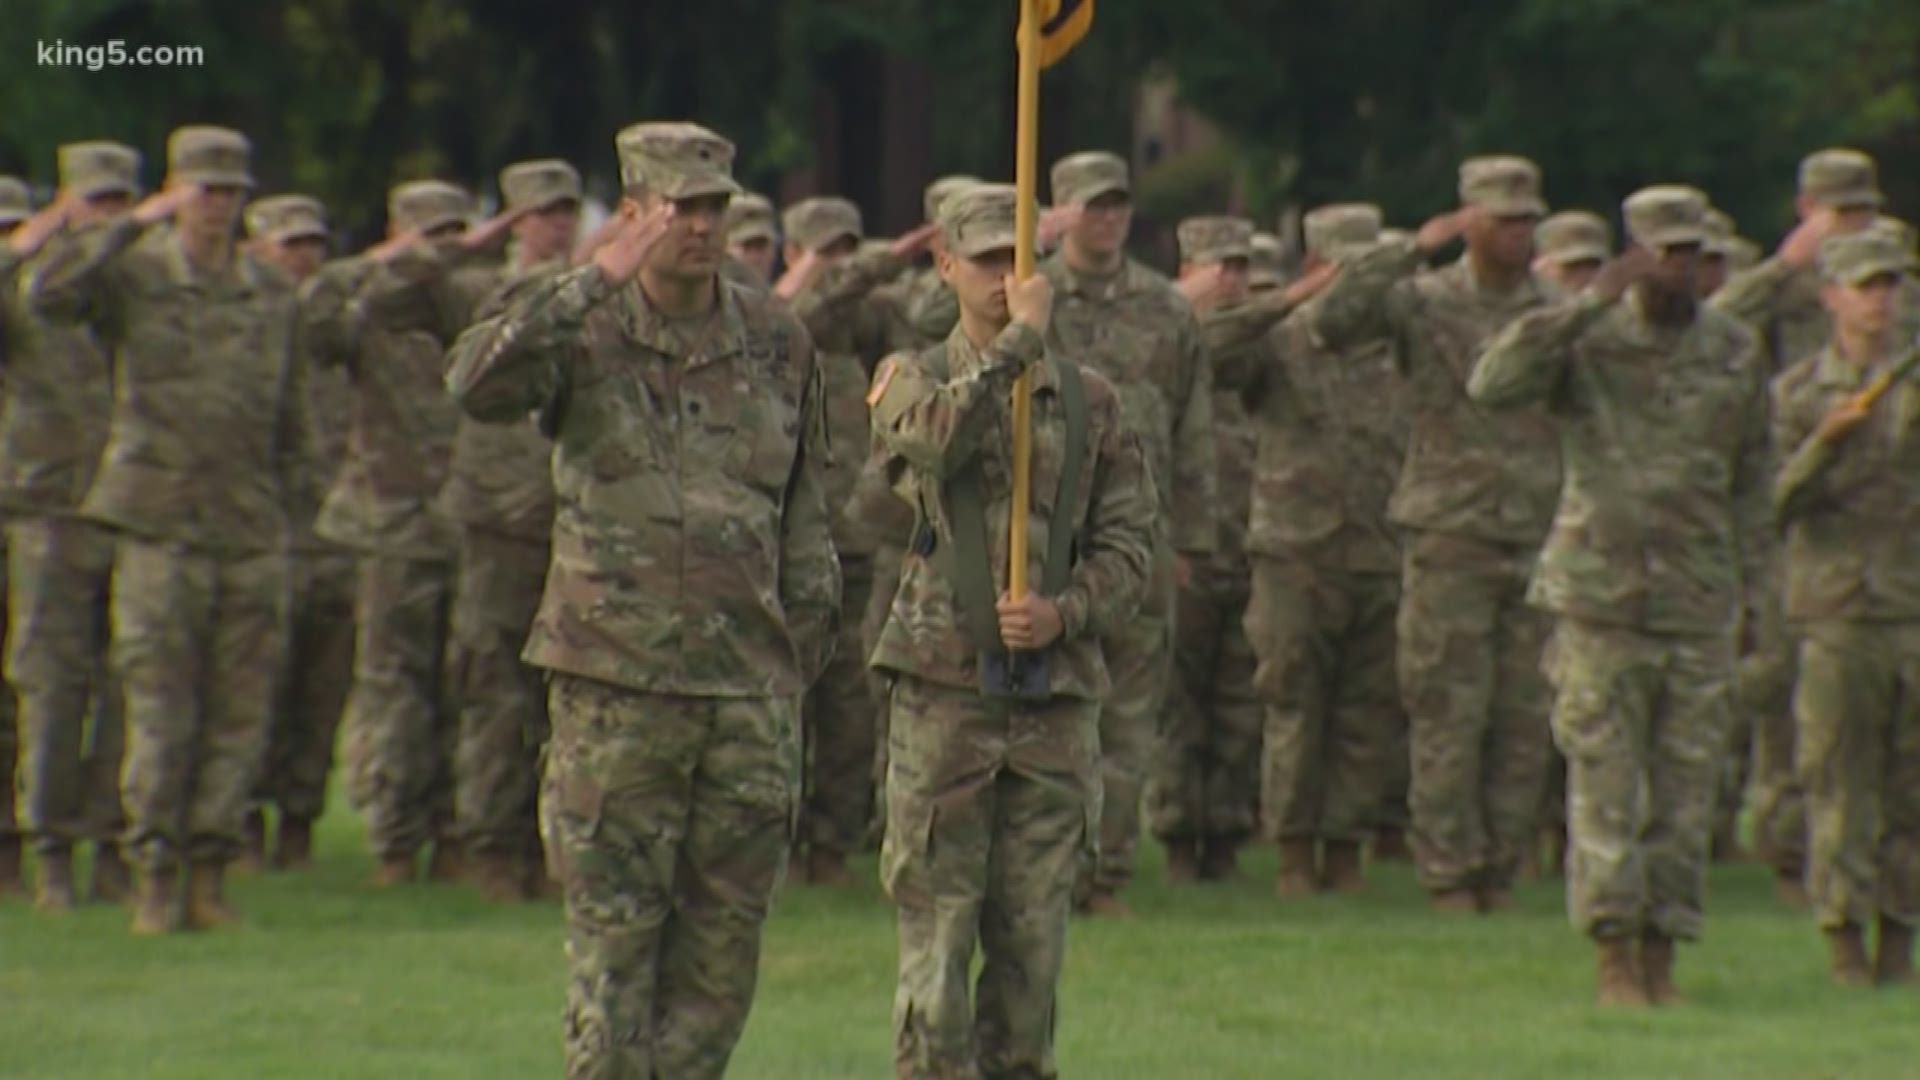 Soldiers at Joint Base Lewis-McChord spent the Thursday morning welcoming international visitors. It marked the start of a two-week-long joint training exercise between the United States Army and the Indian Army. KING 5' Sebastian Robertson reports.